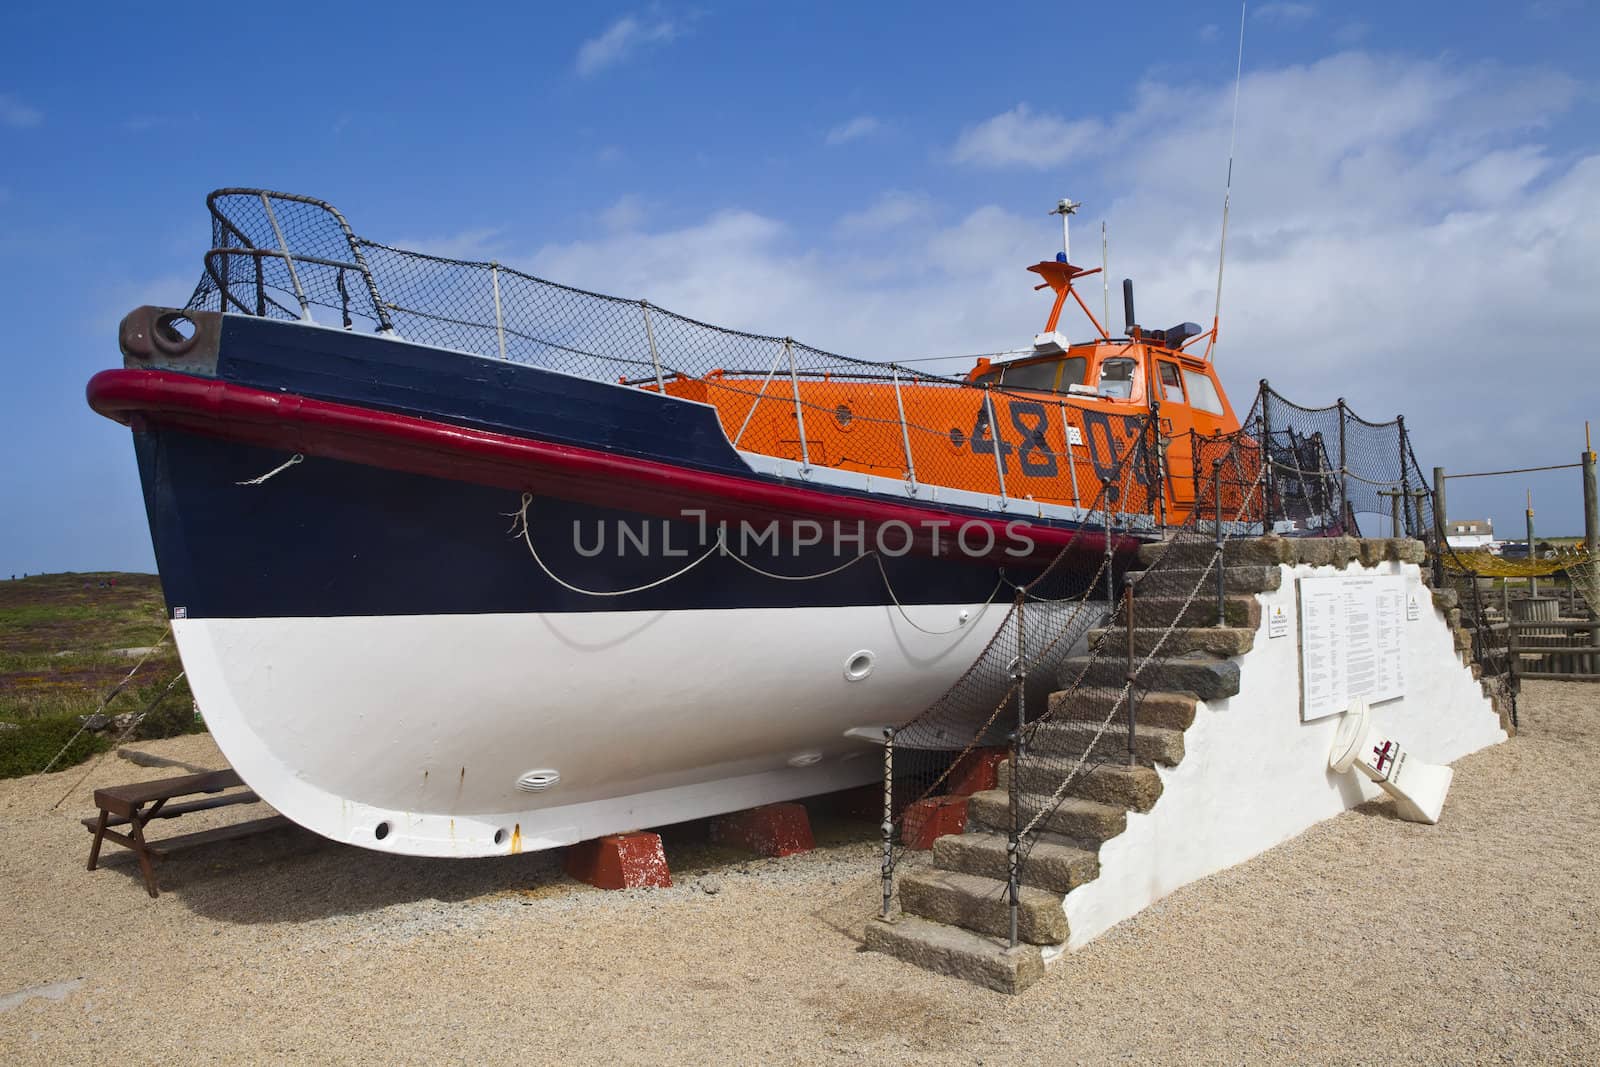 A Lifeboat at Land's End in Cornwall, England.